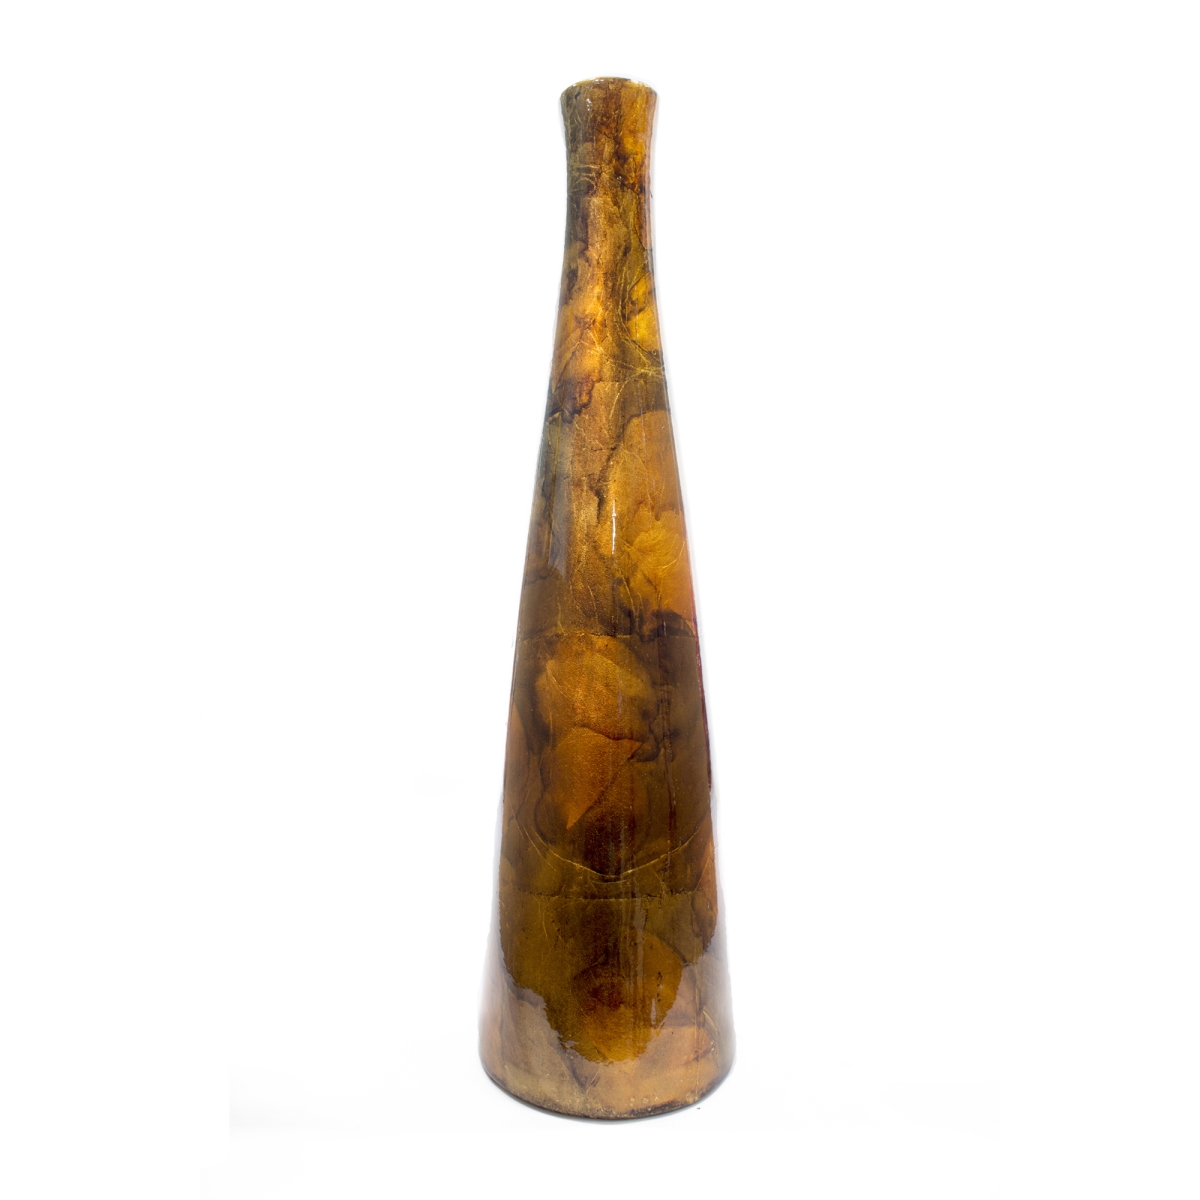 W1036-03 20.2 In. Tinsley Foiled & Lacquered Floor Vase - Gold, Copper & Brown